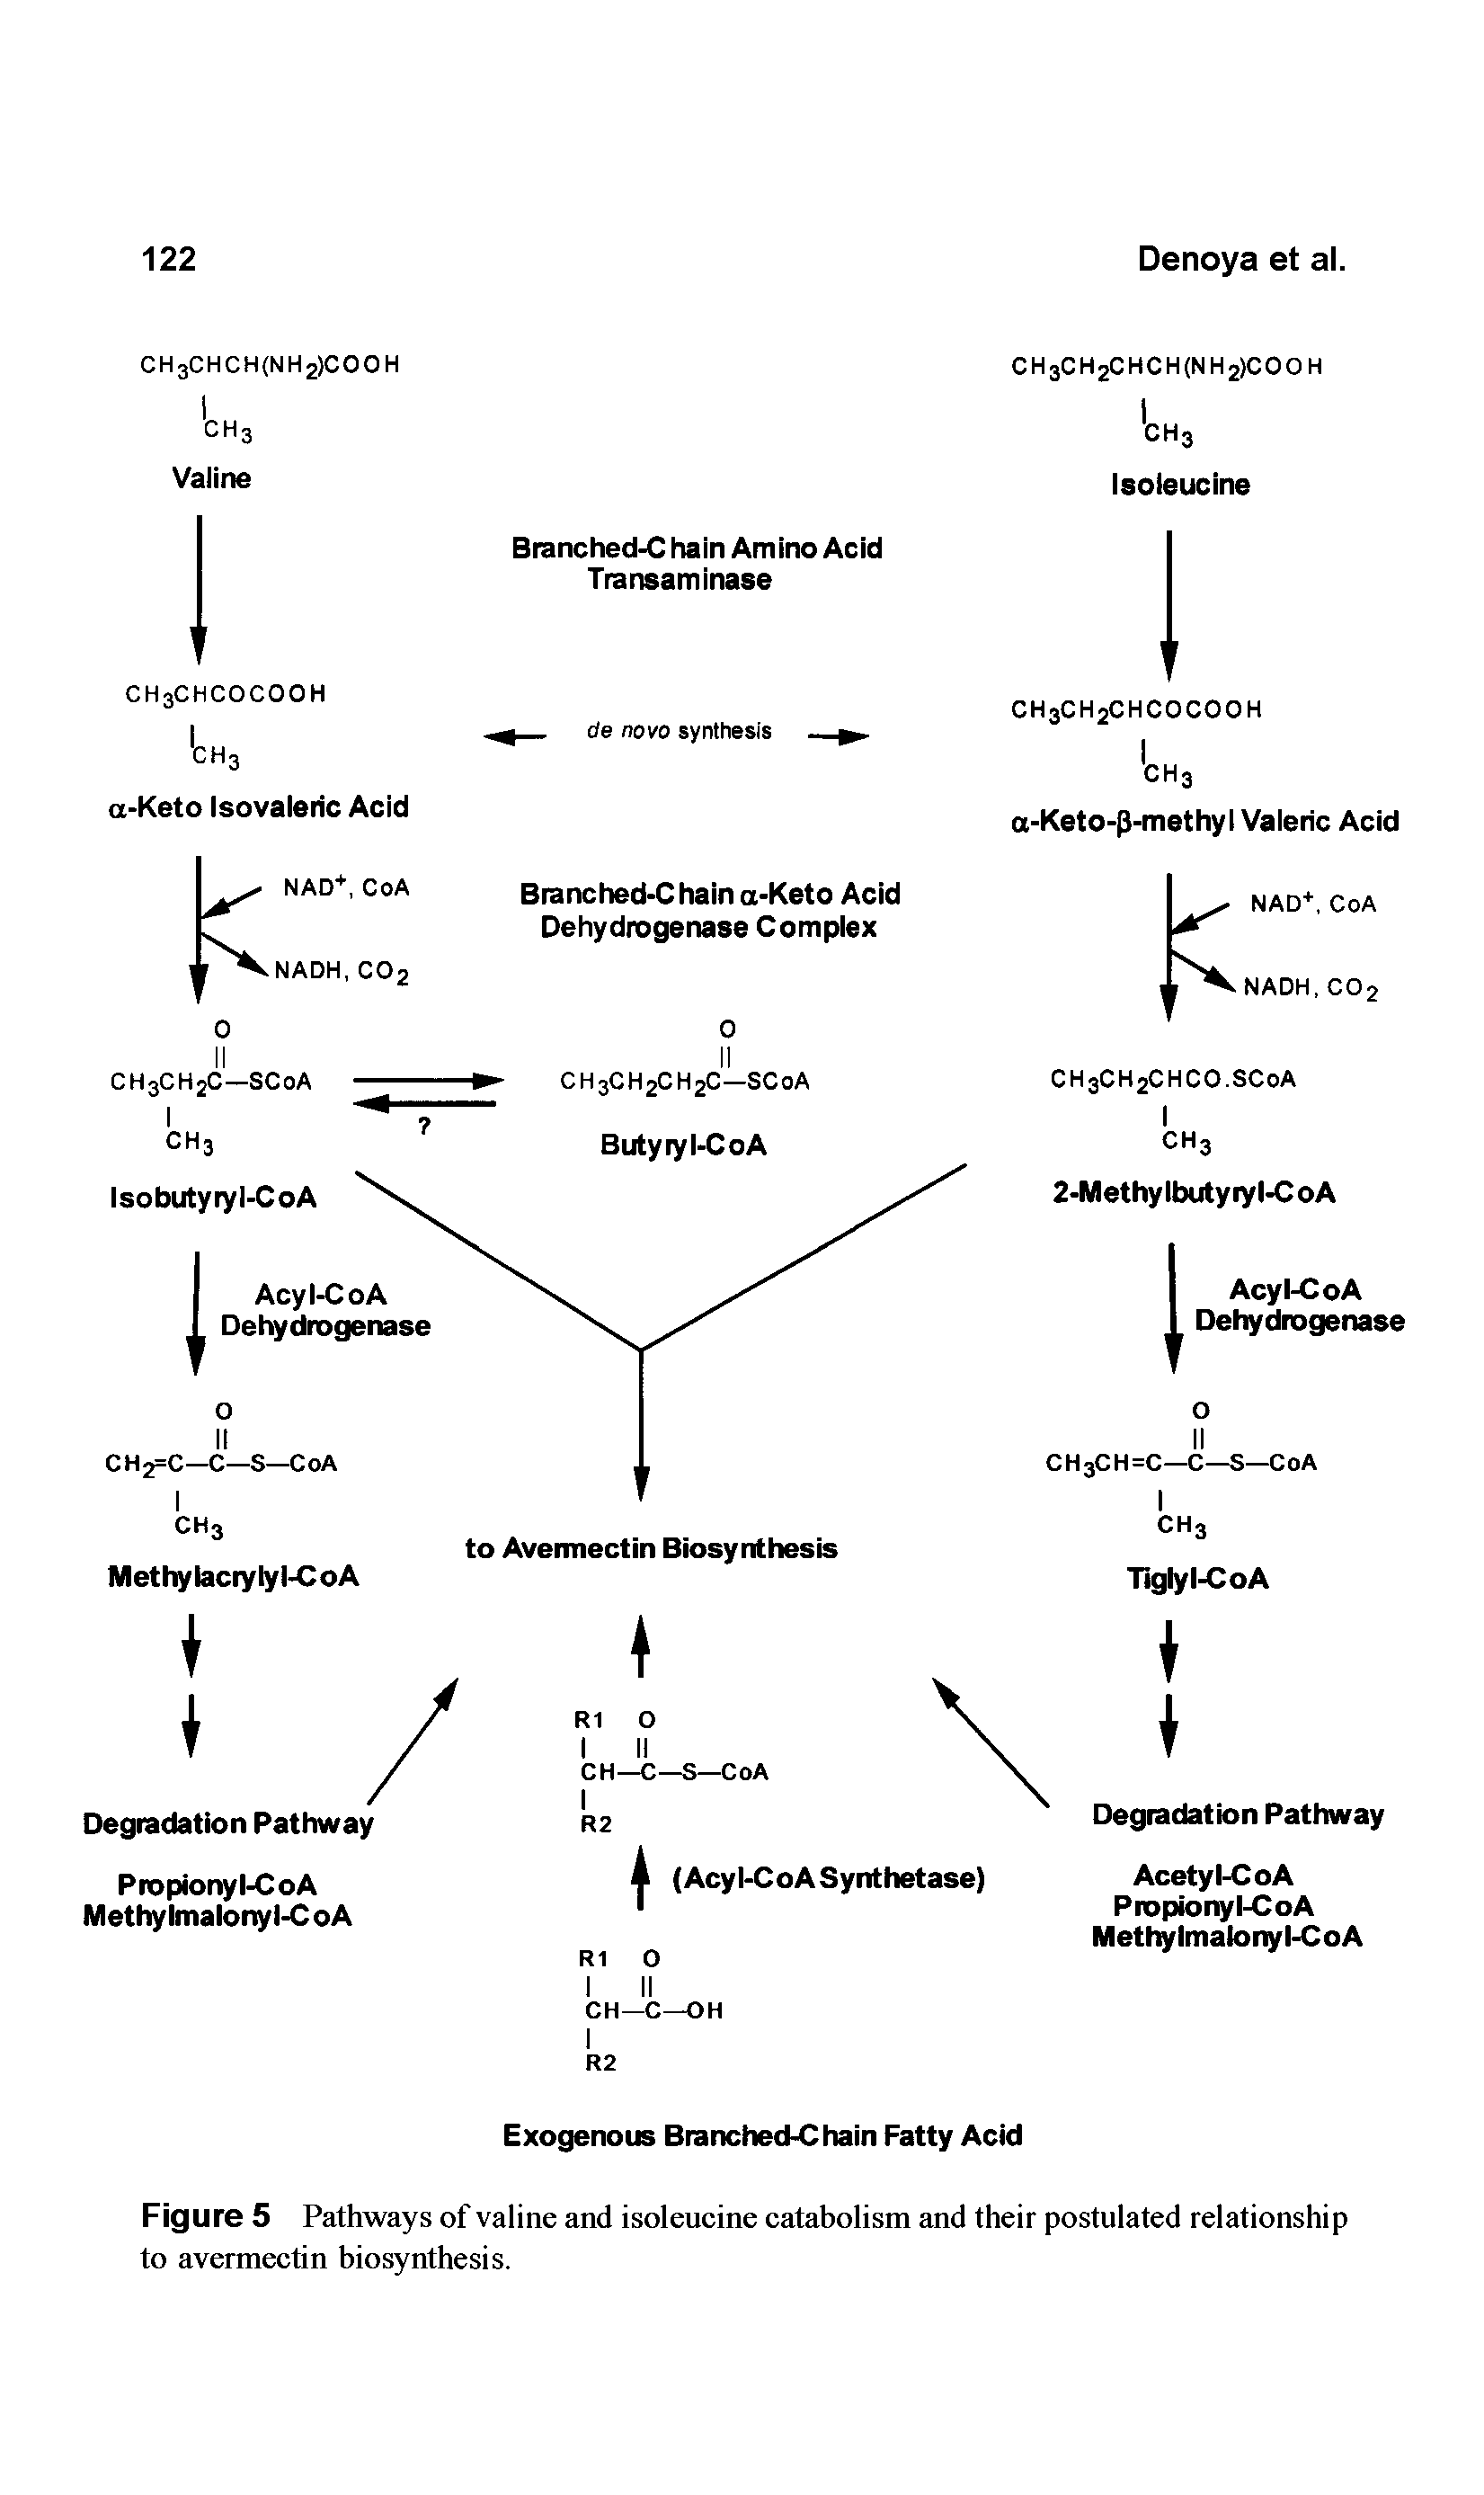 Figure 5 Pathways of valine and isoleucine catabolism and their postulated relationship to avermectin biosynthesis.